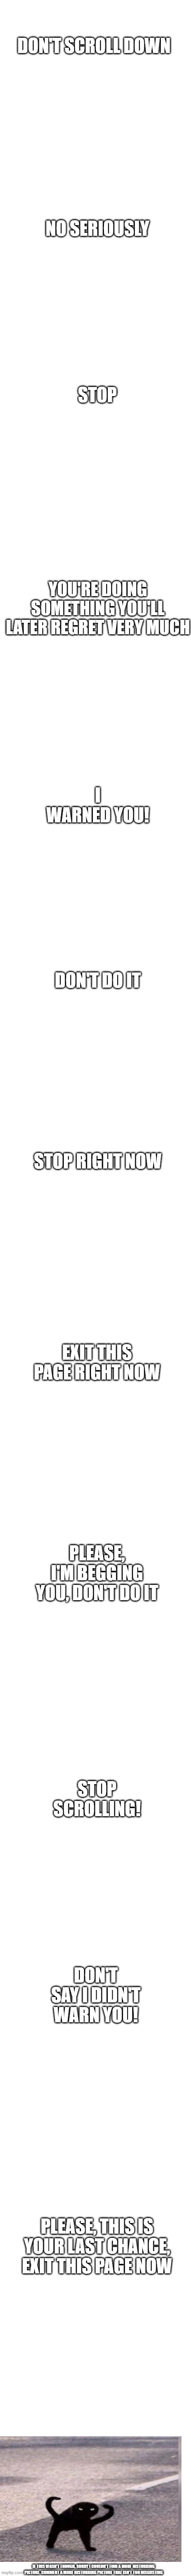 DON'T SCROLL DOWN; NO SERIOUSLY; STOP; YOU'RE DOING SOMETHING YOU'LL LATER REGRET VERY MUCH; I WARNED YOU! DON'T DO IT; STOP RIGHT NOW; EXIT THIS PAGE RIGHT NOW; PLEASE, I'M BEGGING YOU, DON'T DO IT; STOP SCROLLING! DON'T SAY I DIDN'T WARN YOU! PLEASE, THIS IS YOUR LAST CHANCE, EXIT THIS PAGE NOW; IF THIS WASN'T ENOUGH, SORRY I COULDN'T FIND A MORE DISTURBING PICTURE. COMMENT A MORE DISTURBING PICTURE THAT ISN'T TOO DISGUSTING | image tagged in blank white template | made w/ Imgflip meme maker